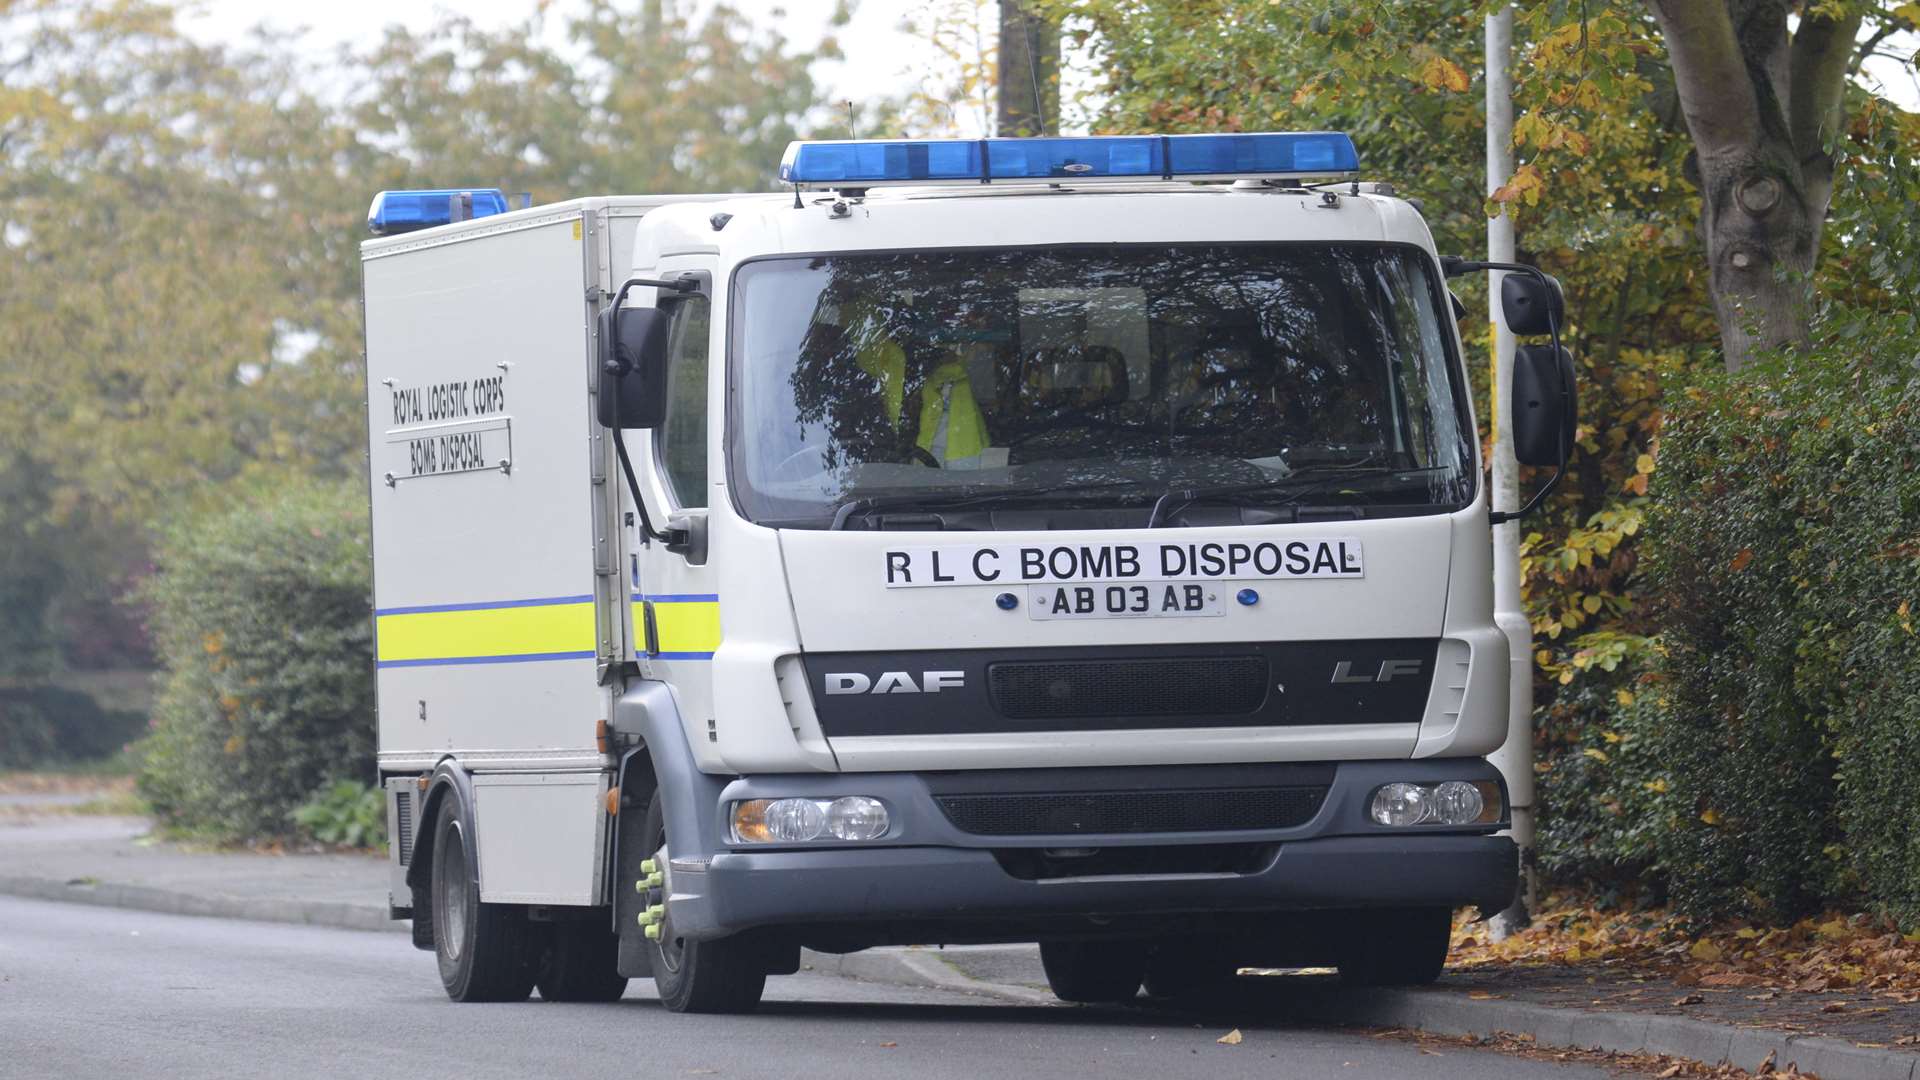 A bomb disposal team was called. Stock image.